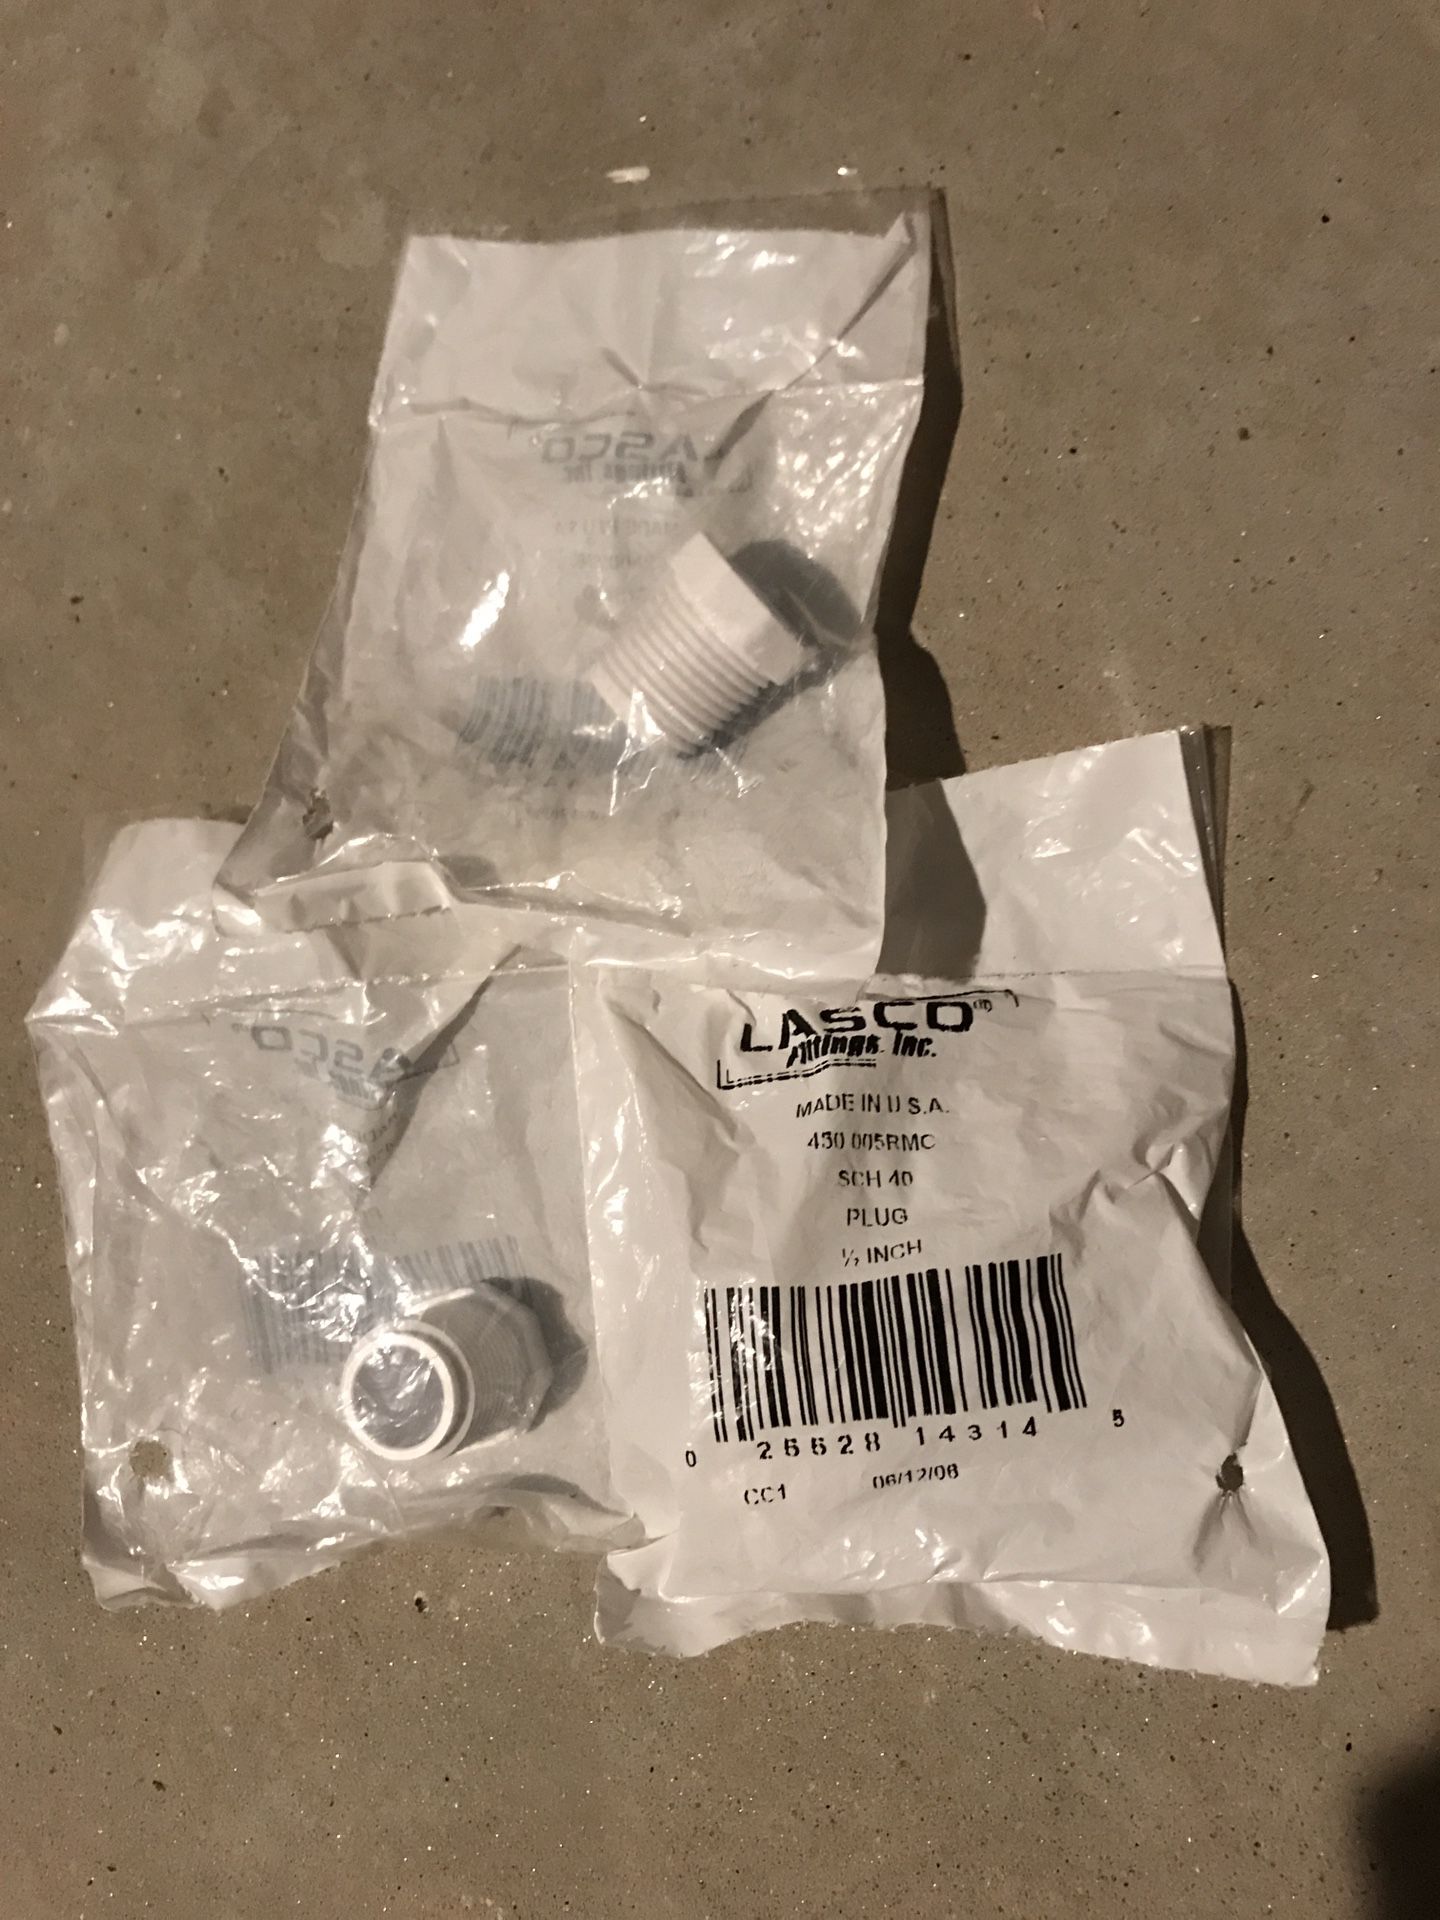 3 hot water heater drain plugs still sealed in packages - RV - Lasco Fittings